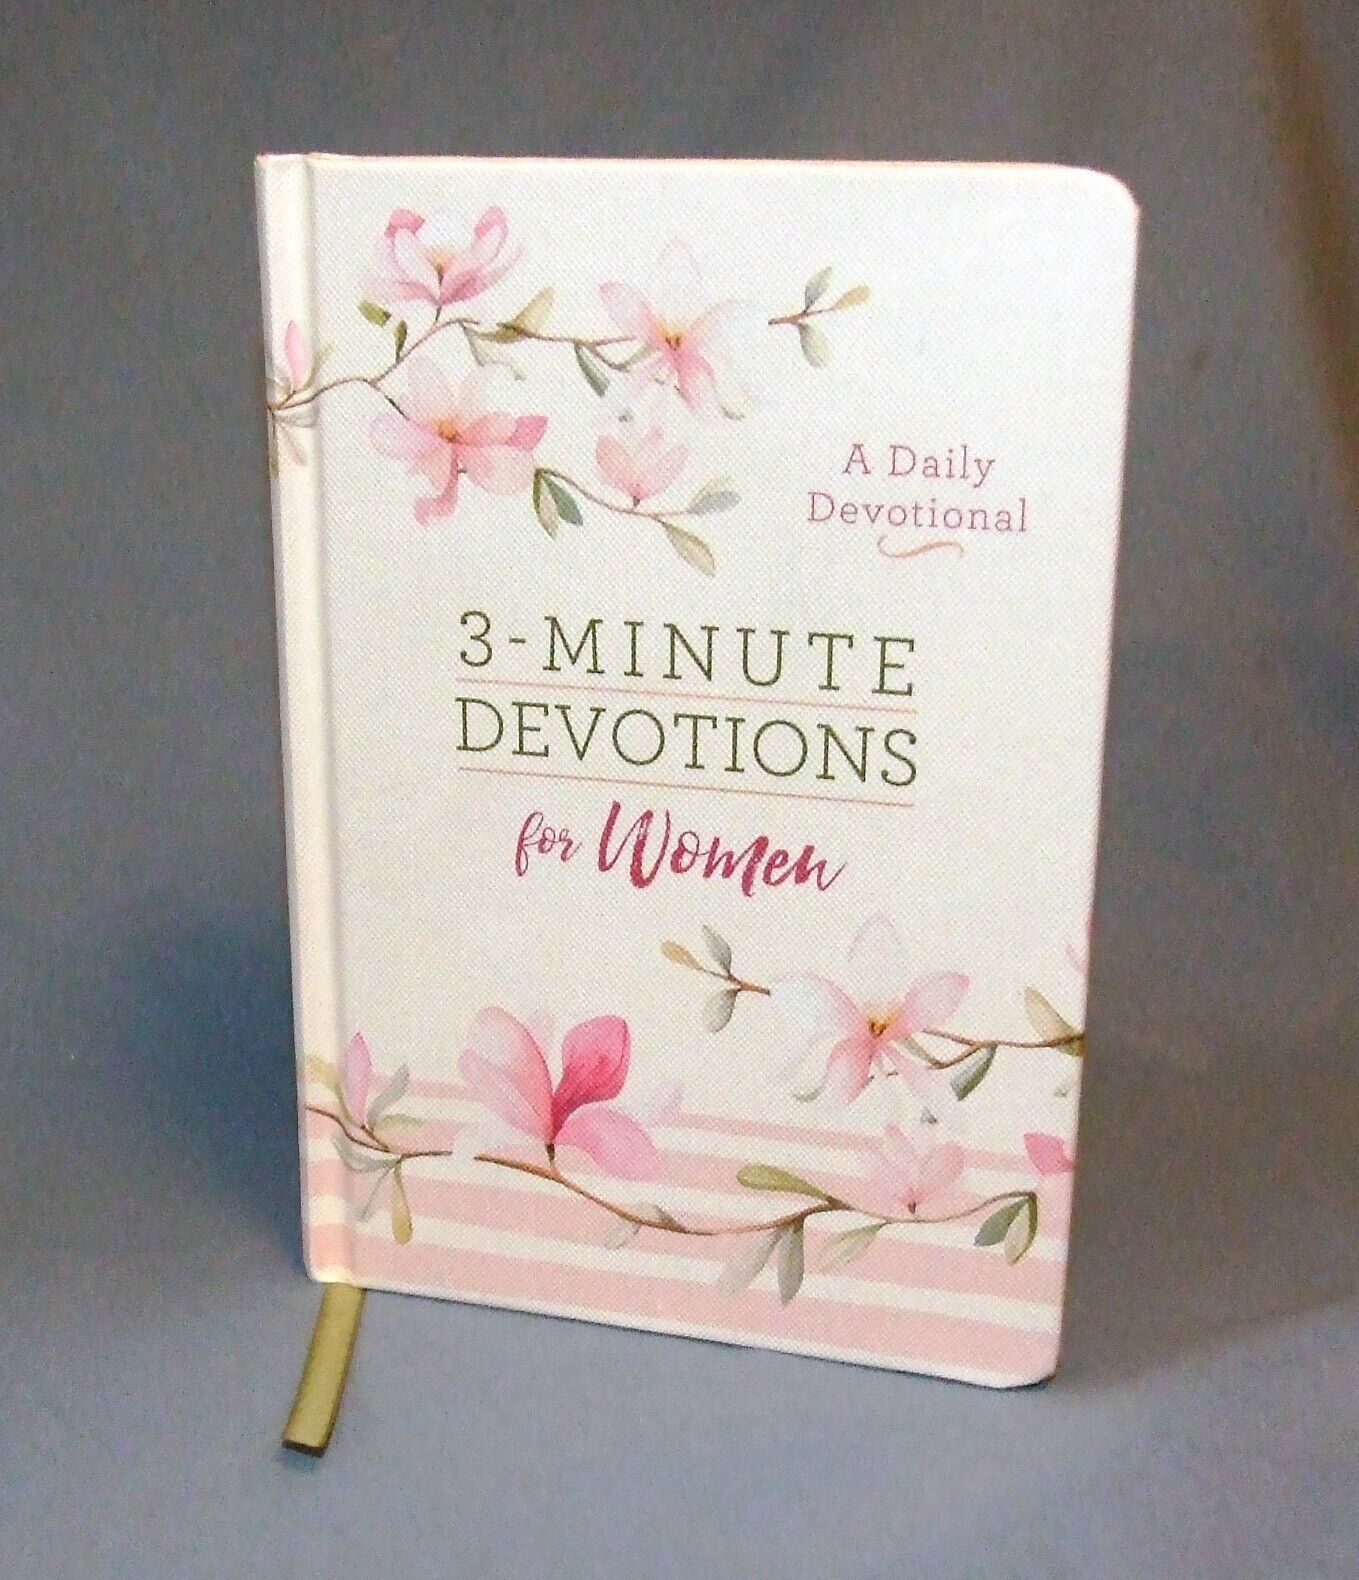 Barbour Books 3-Minute Devotions for Women (Hardback) 2013 - New Other